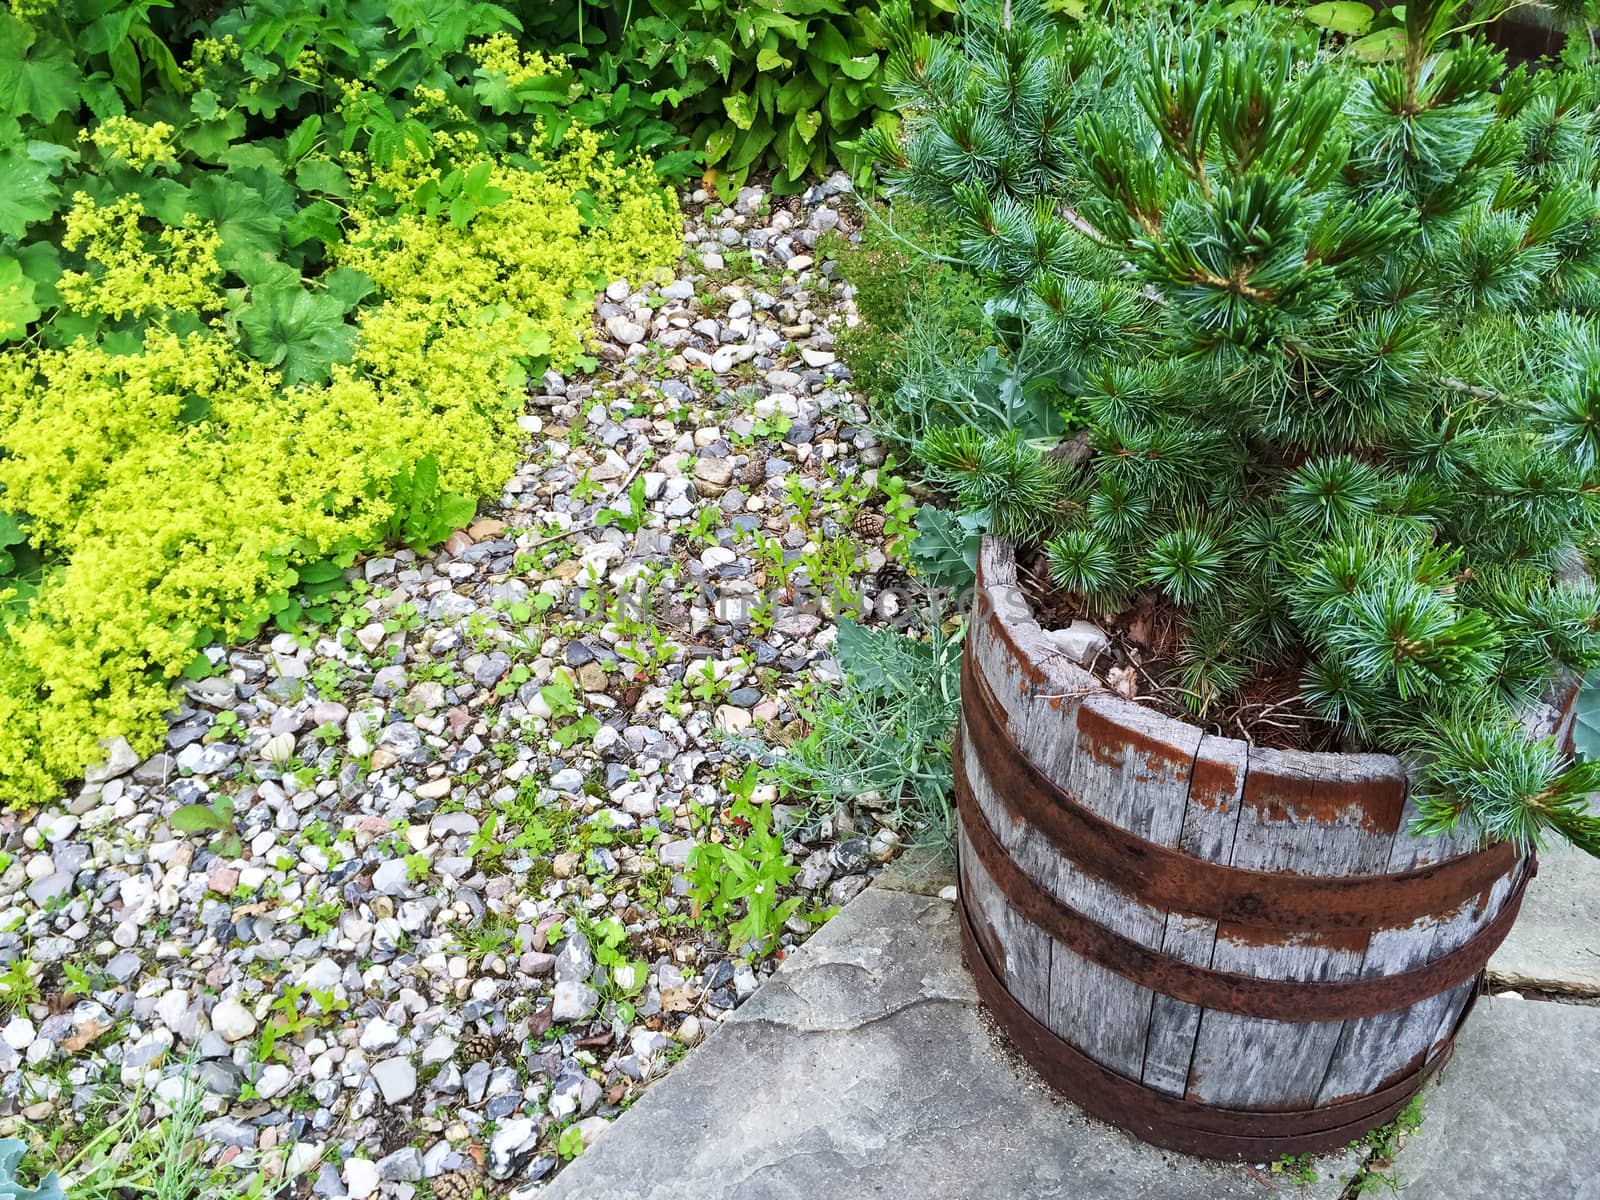 Garden with little pine tree growing in a wooden pot.